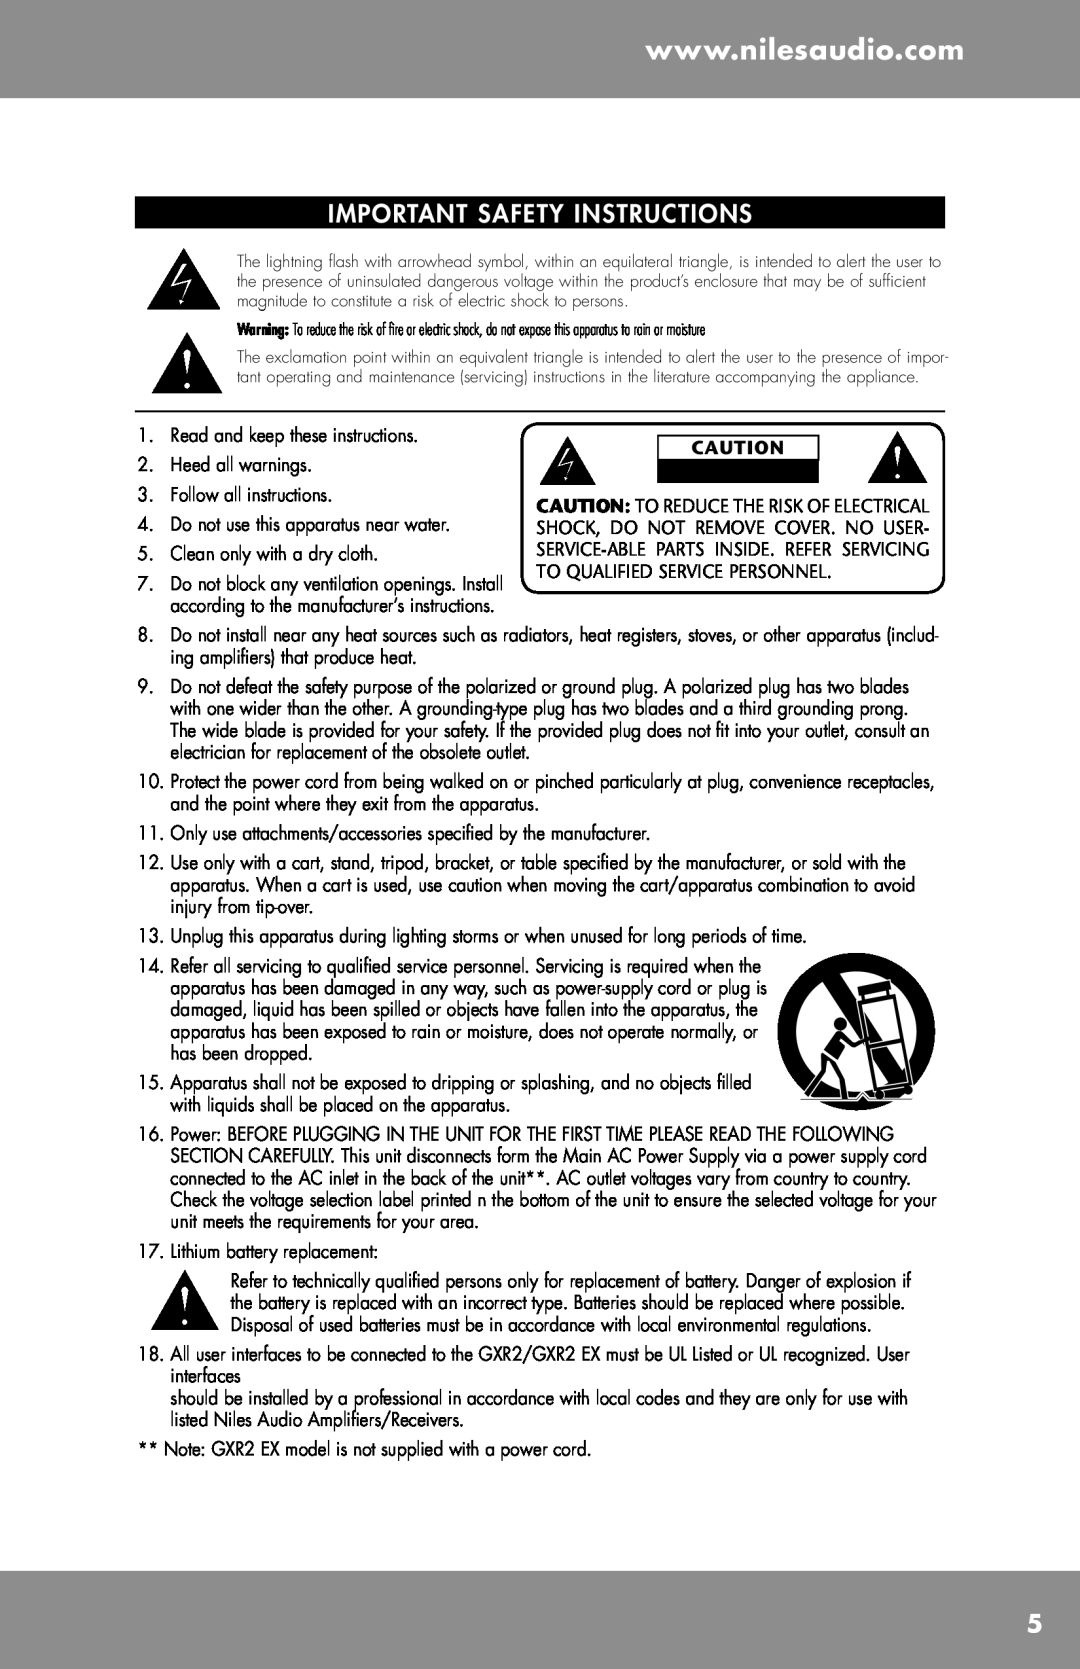 Niles Audio GXR2 manual Important Safety Instructions 